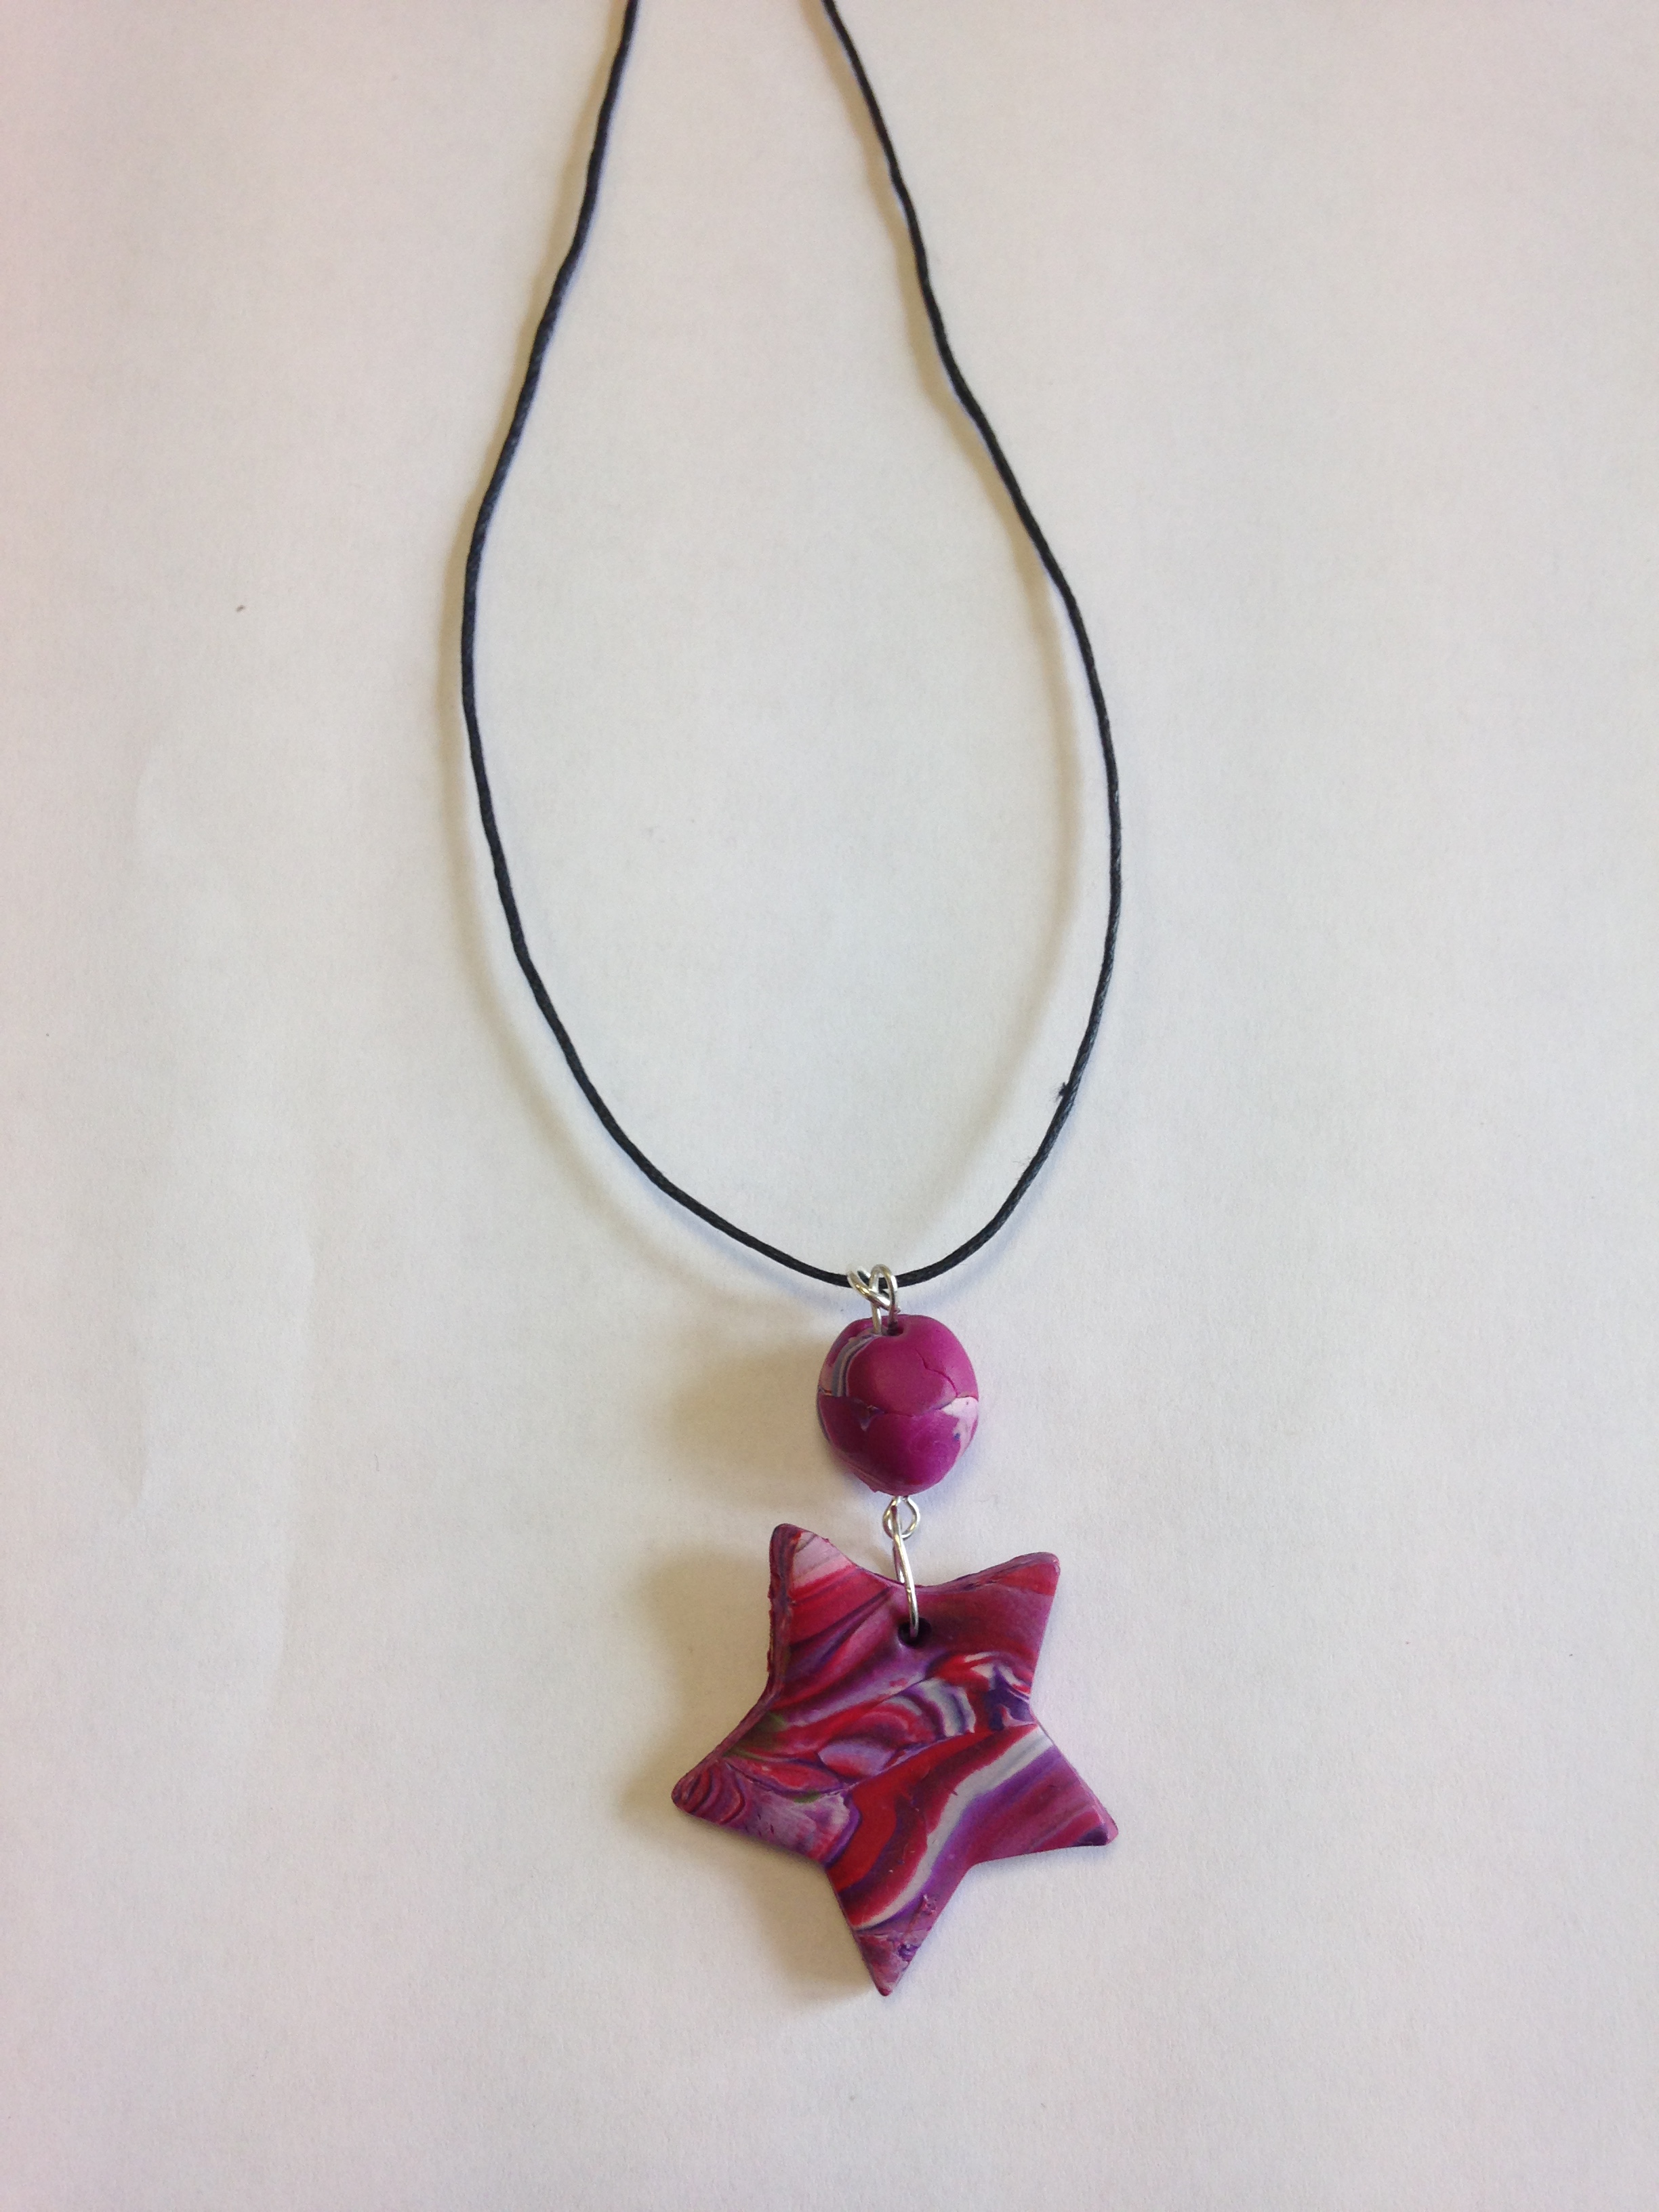 necklace with a pink ball and star as a pendant